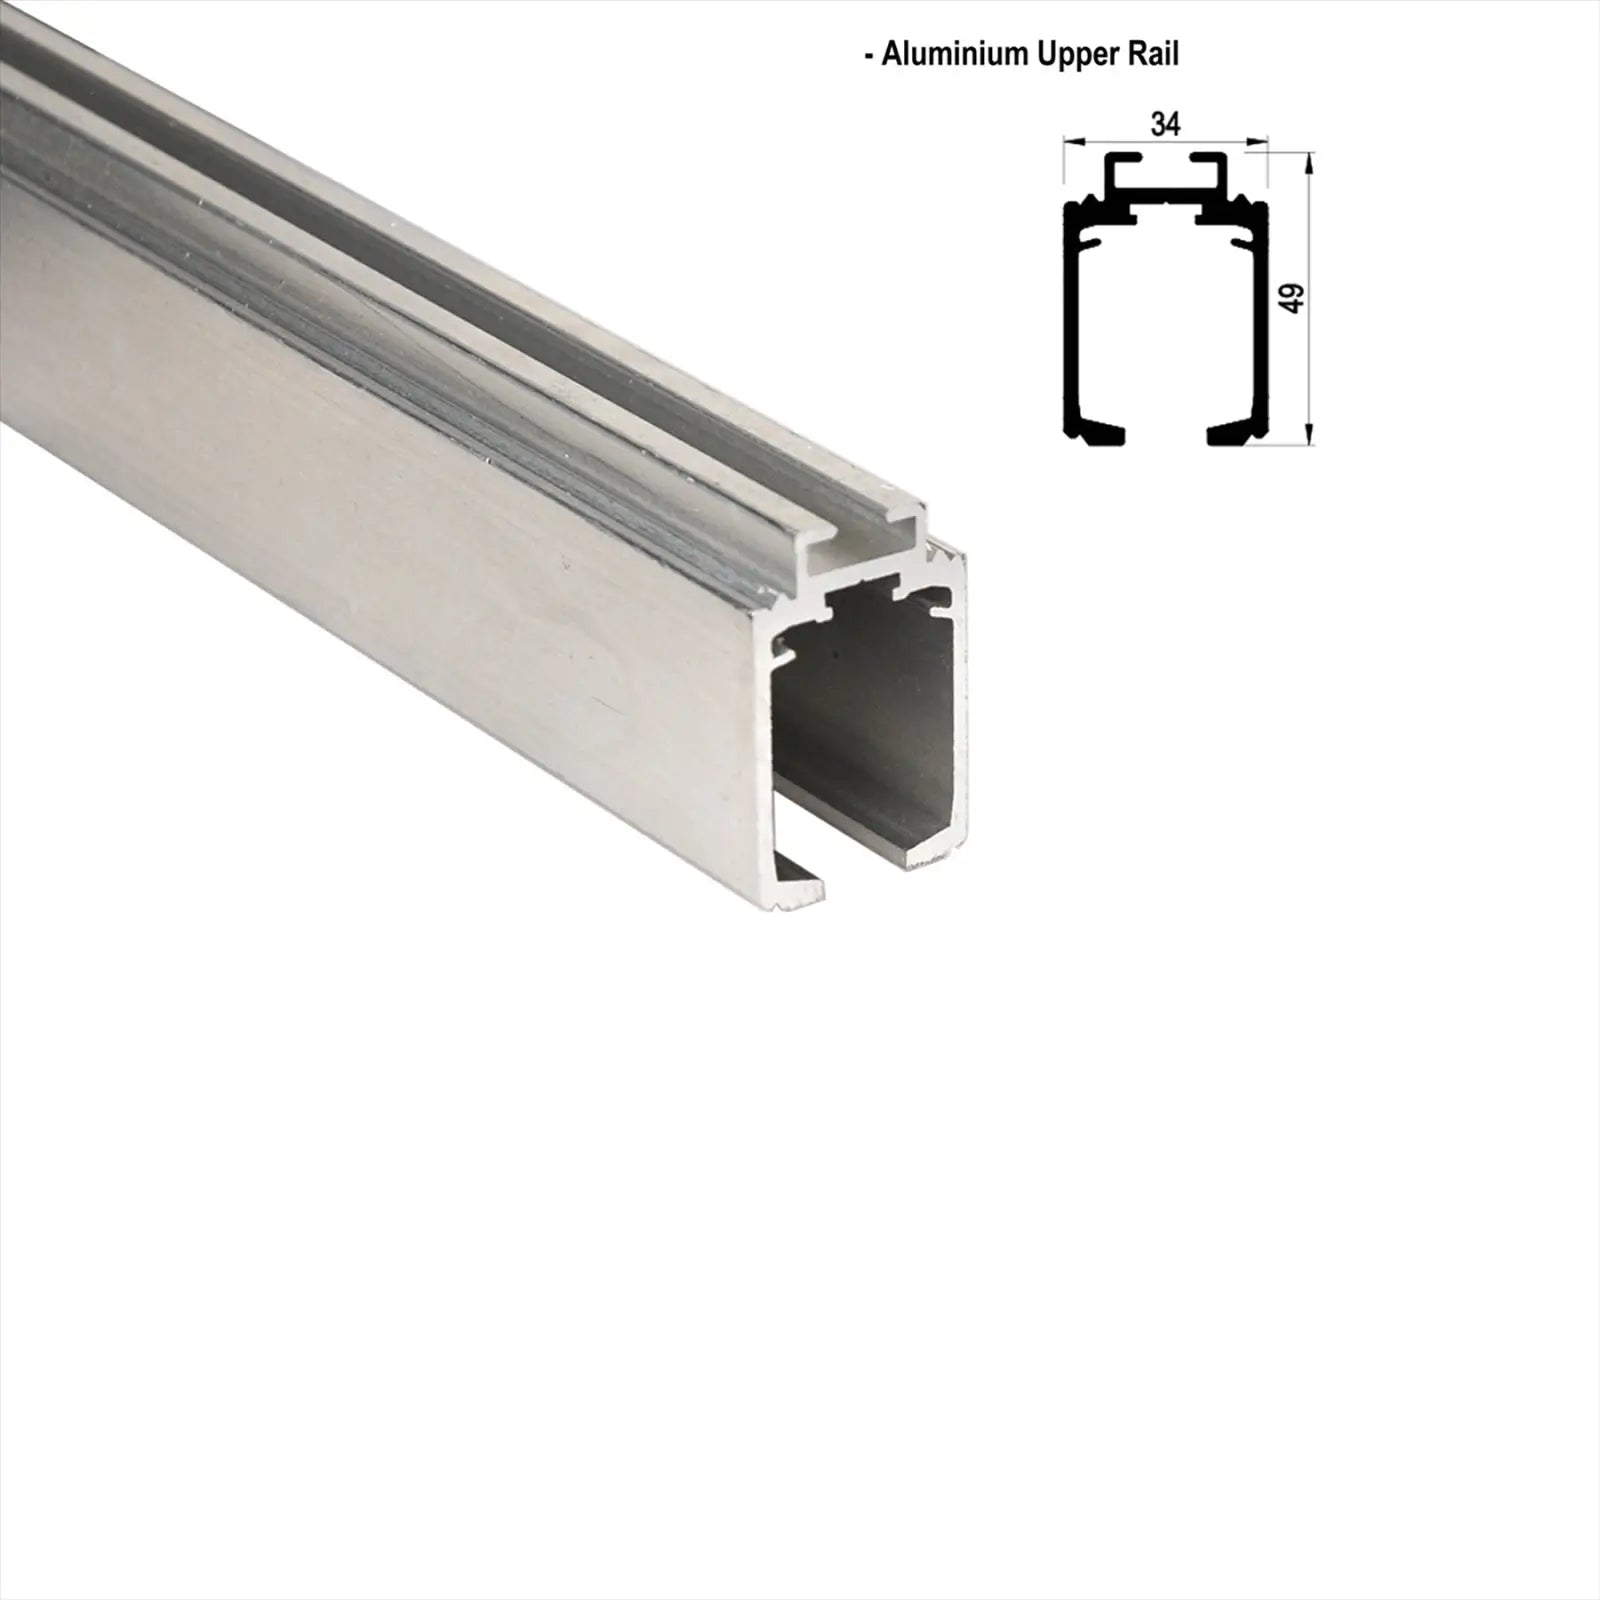 DS-Slide Double Synchro Sliding Door Kit - 3600mm Track - One Way Soft Close - Decor And Decor